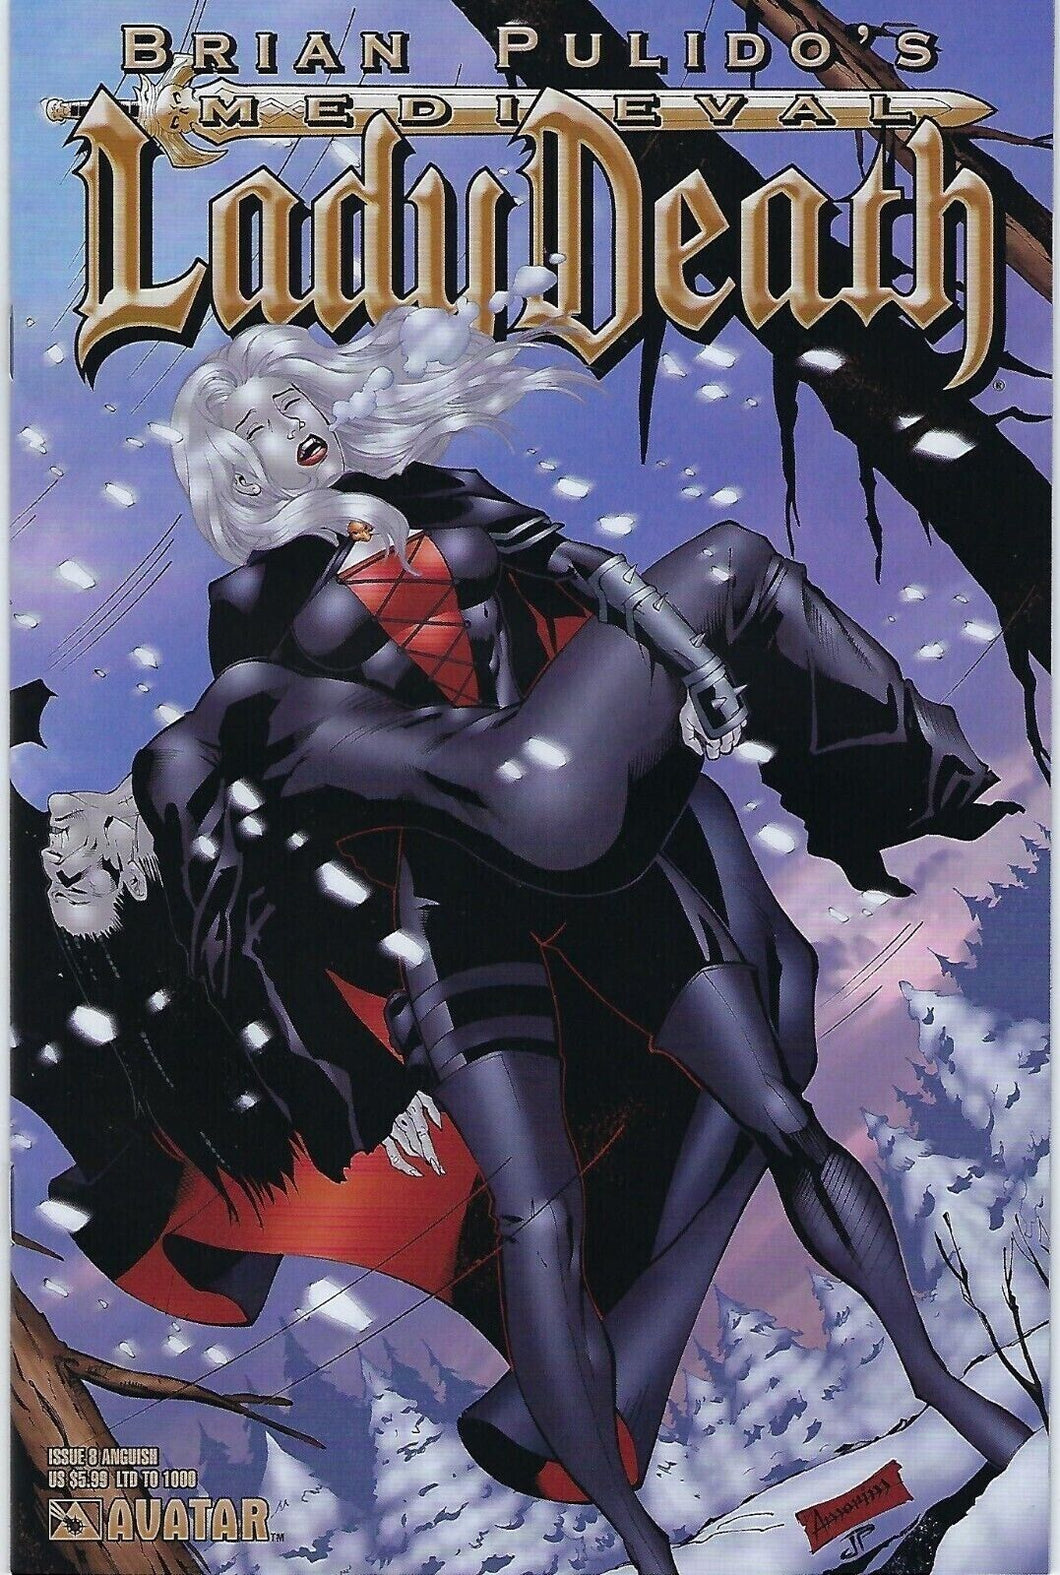 Medieval Lady Death # 8 Anguish Limited to 1000 Variant Cover !!! NM